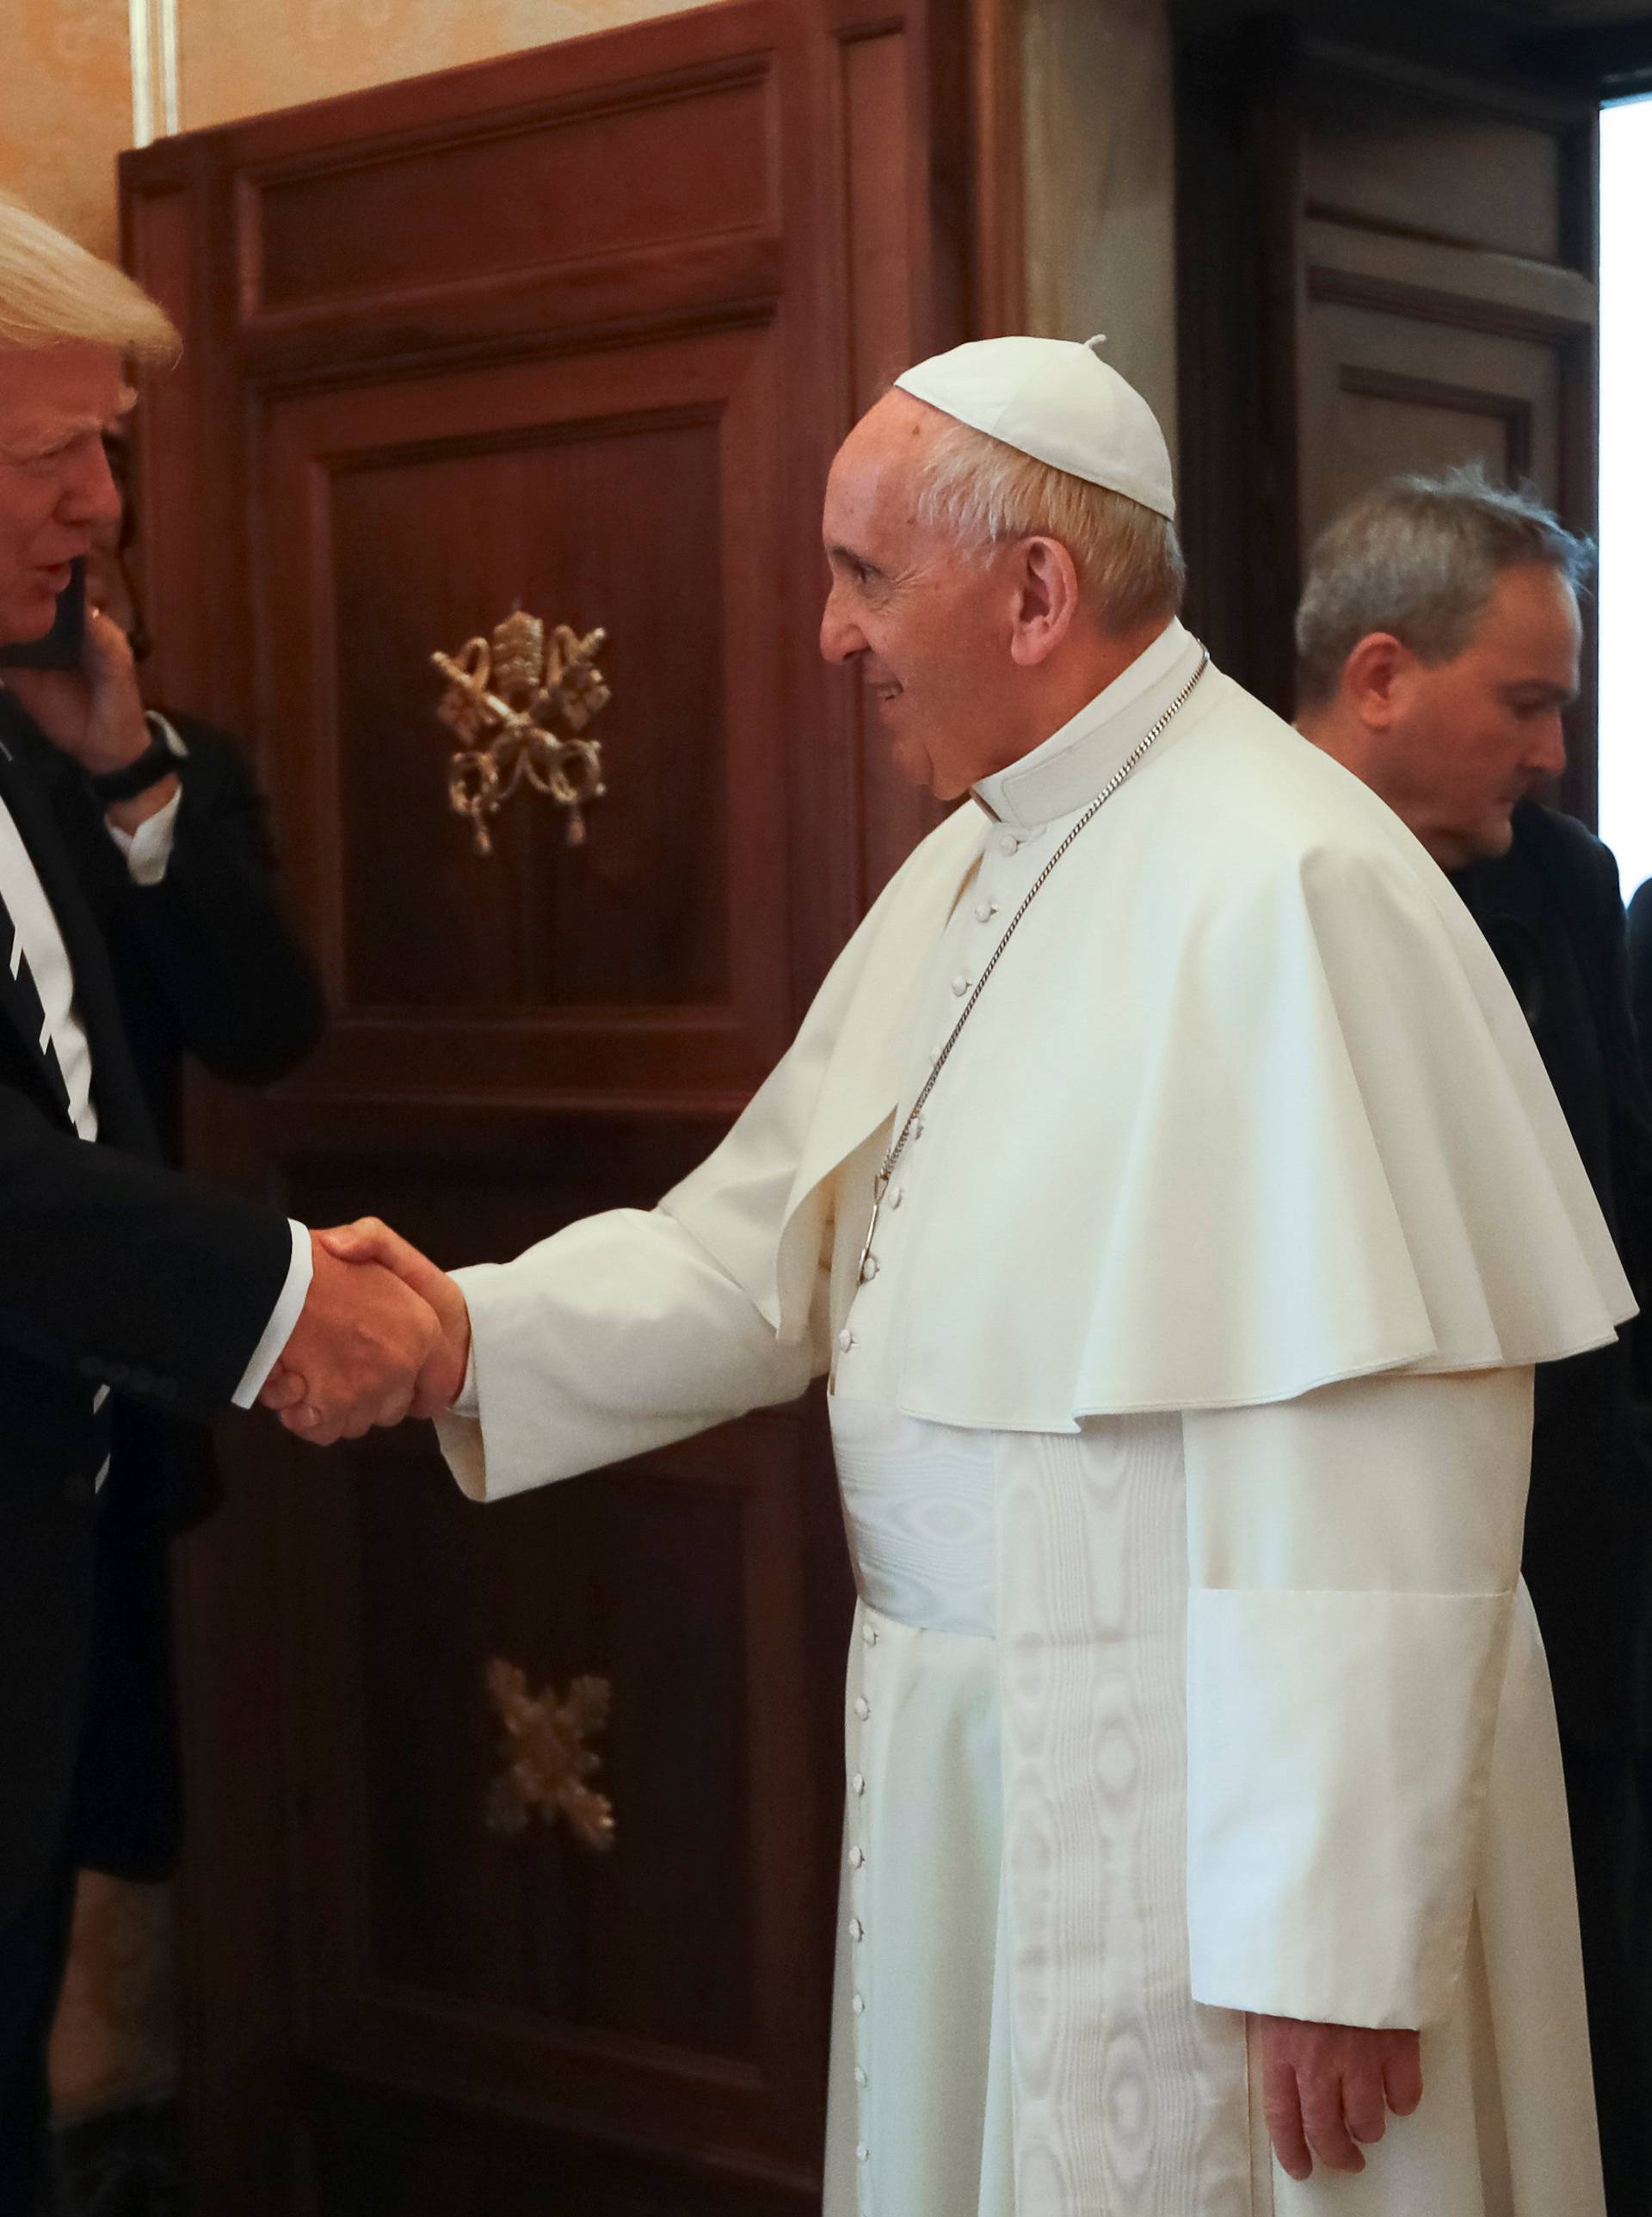 Pope Francis meets U.S. President Donald Trump and his wife Melania during a private audience at the Vatican